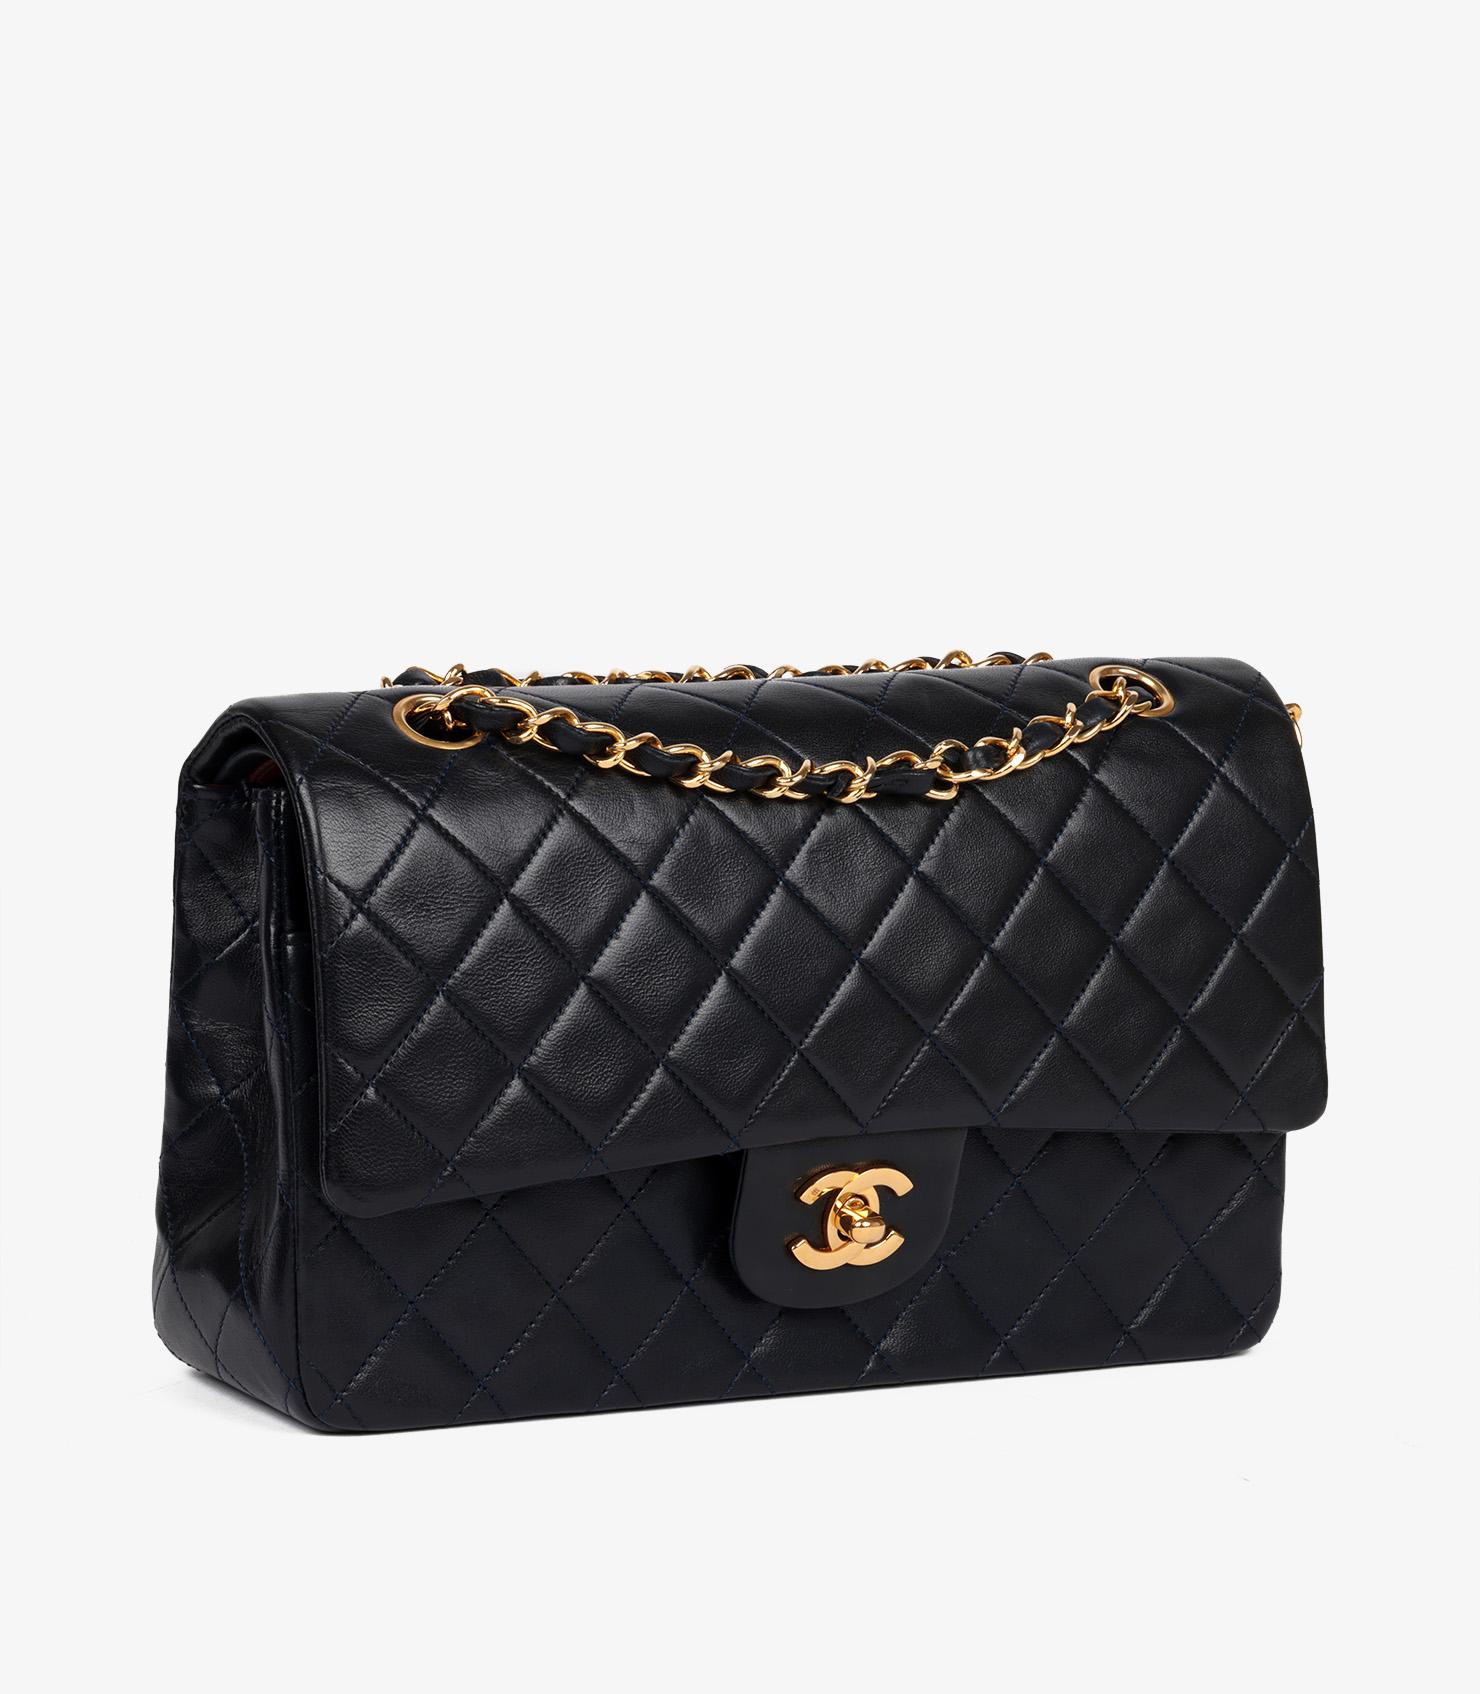 Chanel Navy Quilted Lambskin Vintage Medium Classic Double Flap Bag

Brand- Chanel
Model- Medium Classic Double Flap Bag
Product Type- Shoulder
Serial Number- 16*****
Age- Circa 1991
Accompanied By- Chanel Dust Bag, Authenticity Card
Colour-